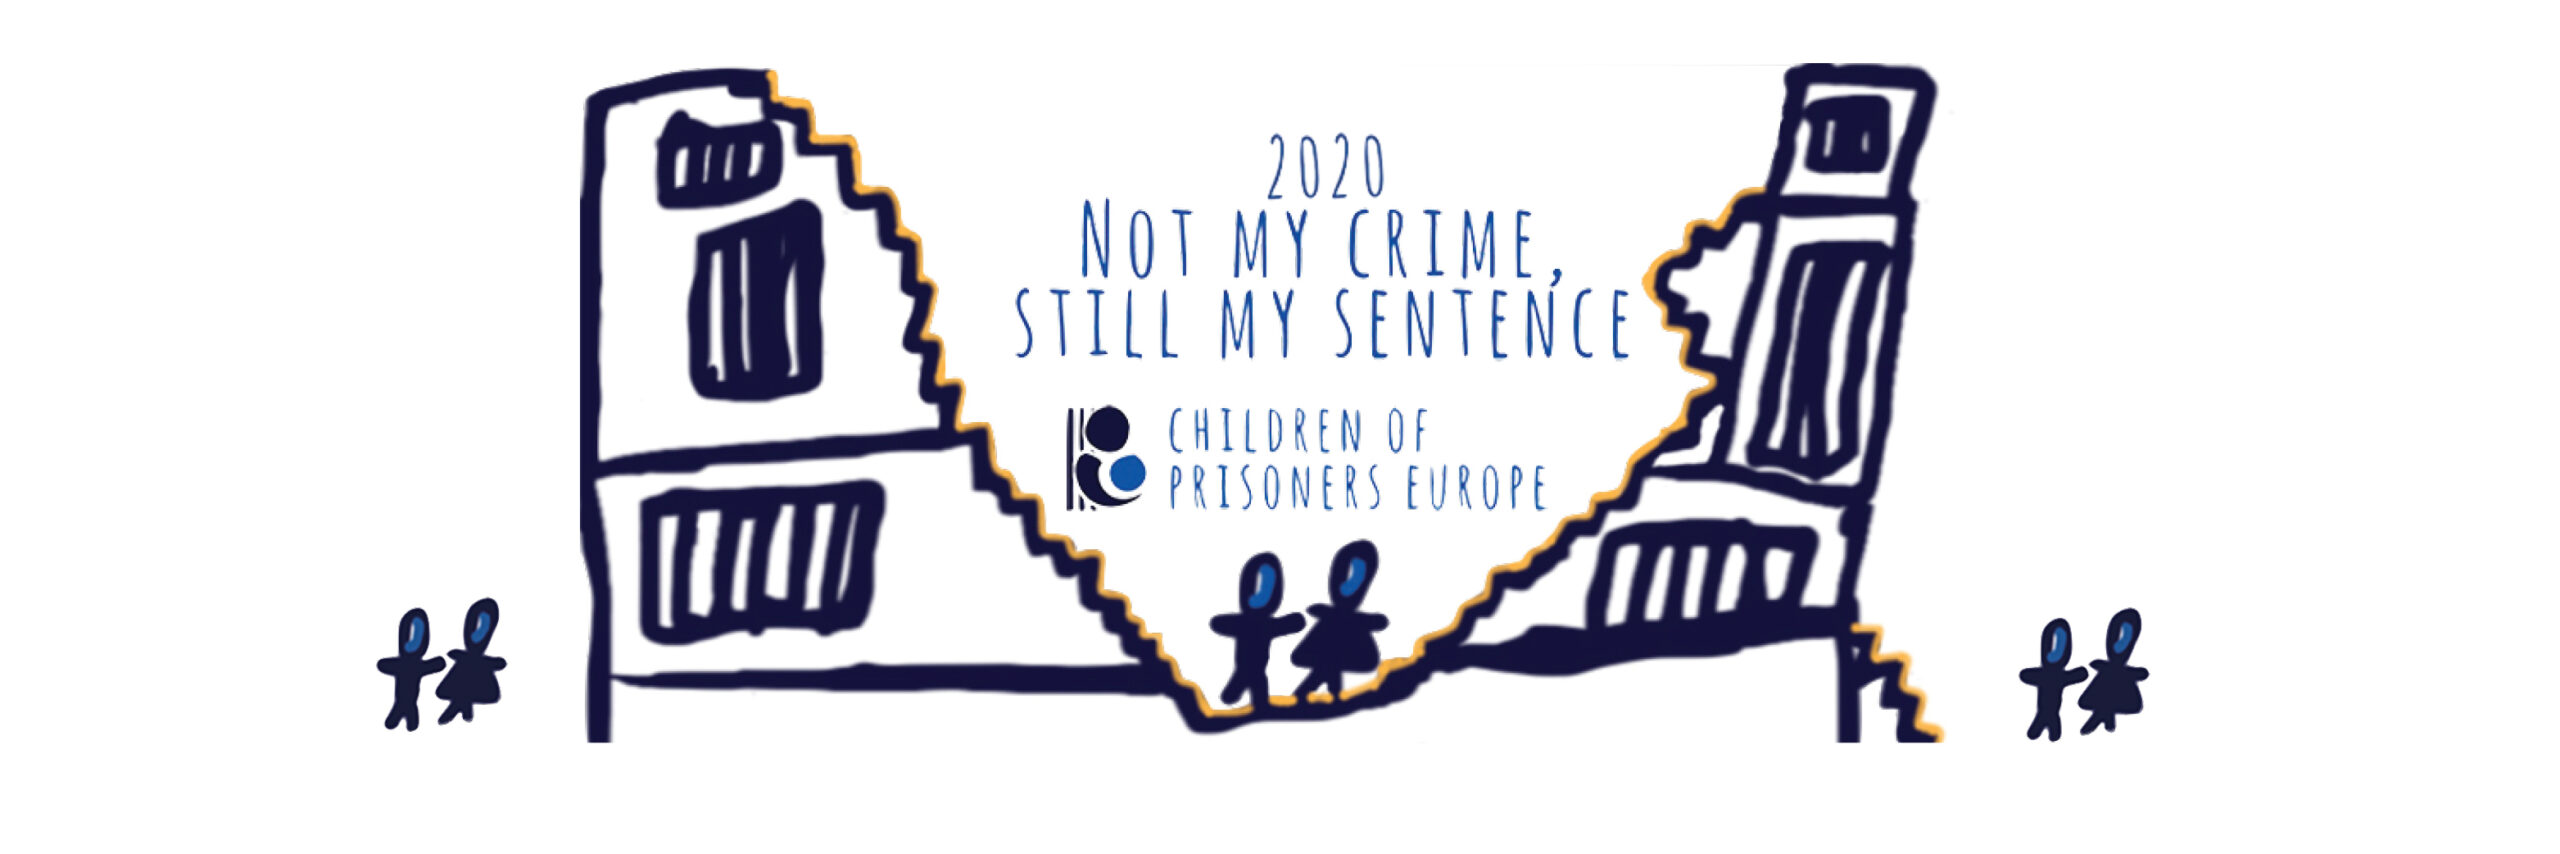 2020 Not my crime, still my sentence campaign launch!